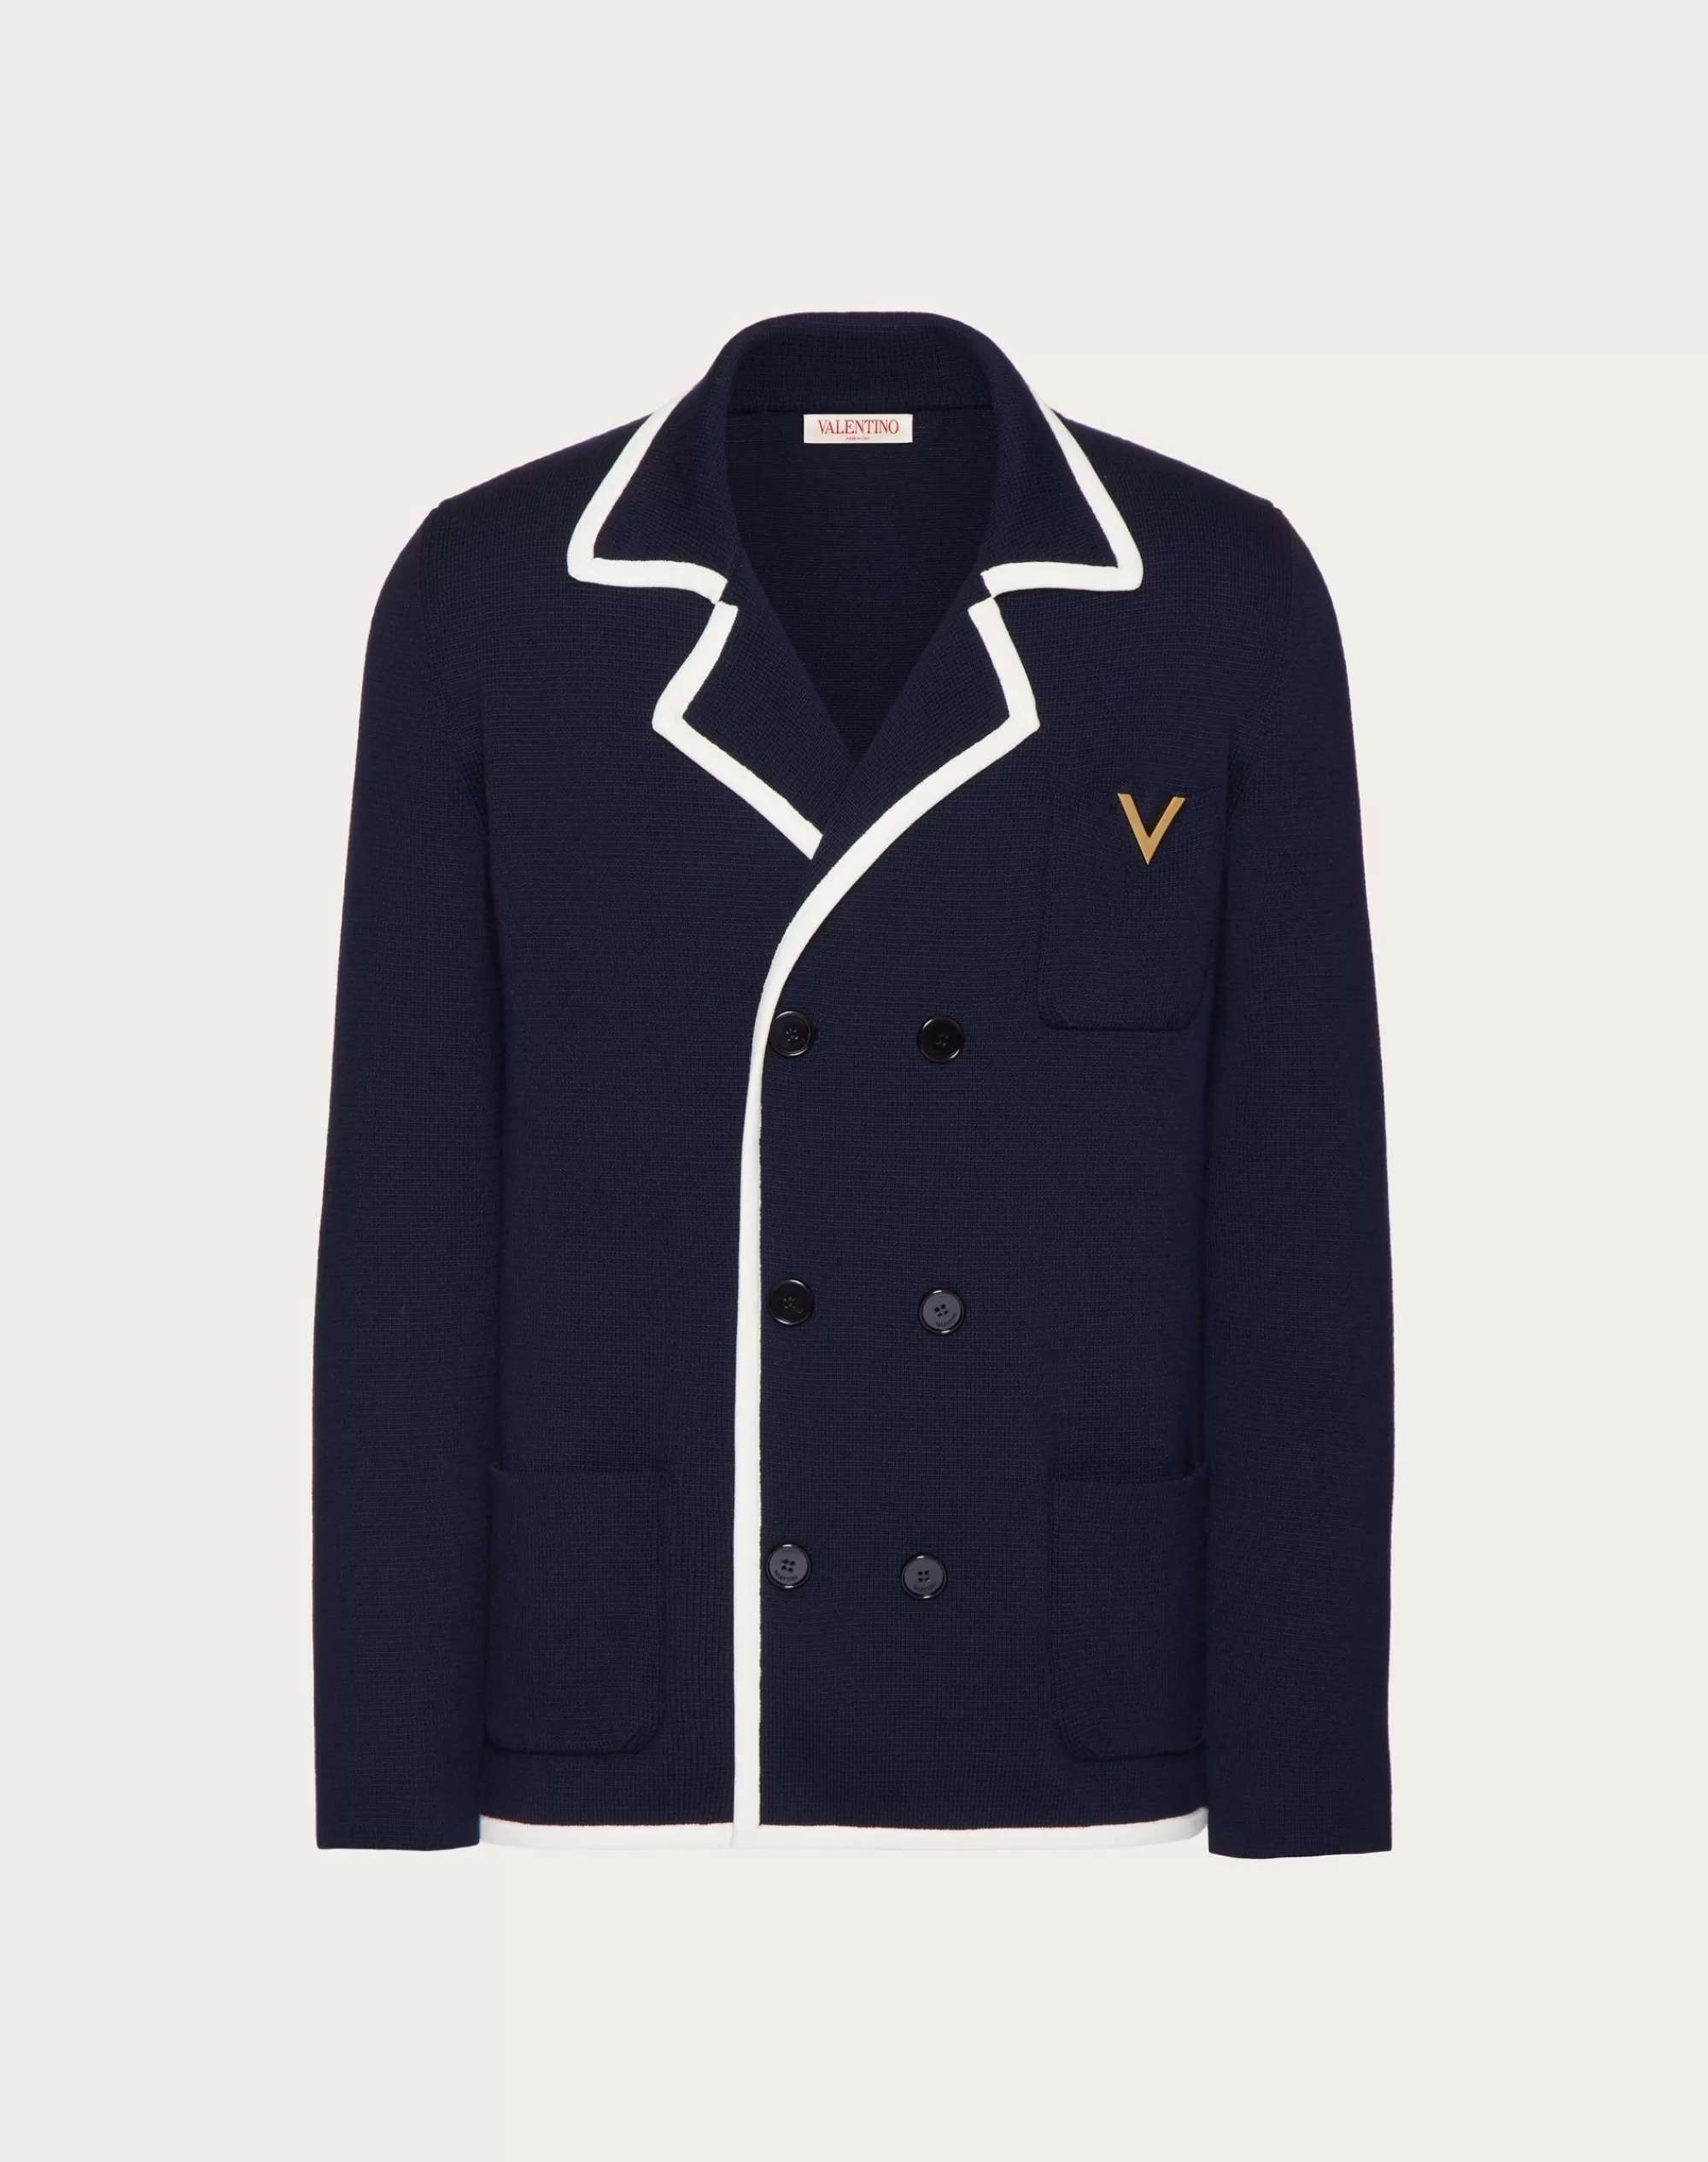 Valentino DOUBLE-BREASTED WOOL JACKET WITH METALLIC V DETAIL Navy/ivory Flash Sale